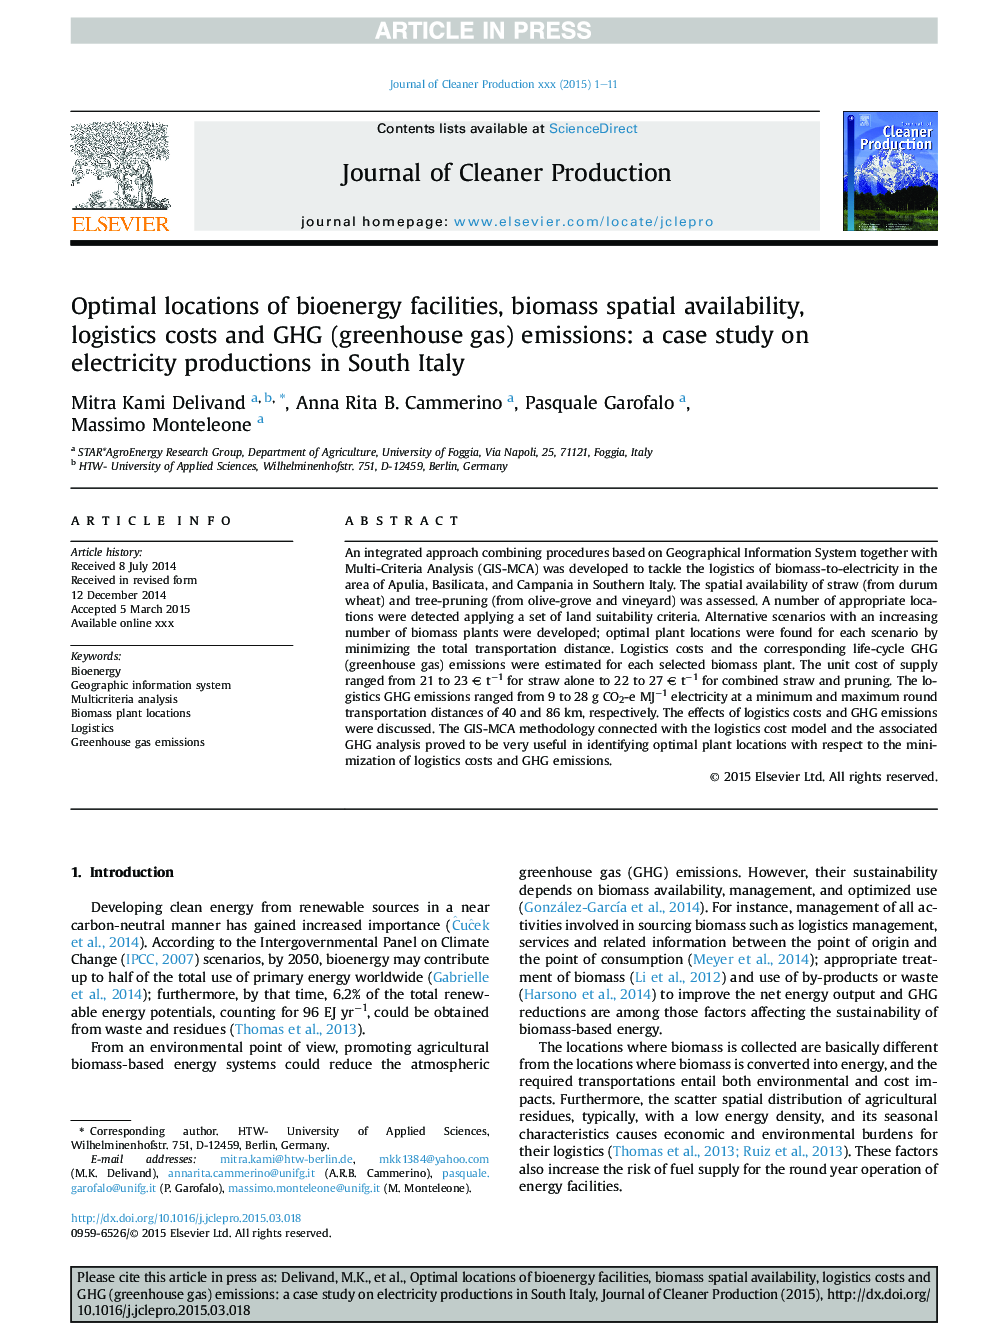 Optimal locations of bioenergy facilities, biomass spatial availability, logistics costs and GHG (greenhouse gas) emissions: a case study on electricity productions in South Italy